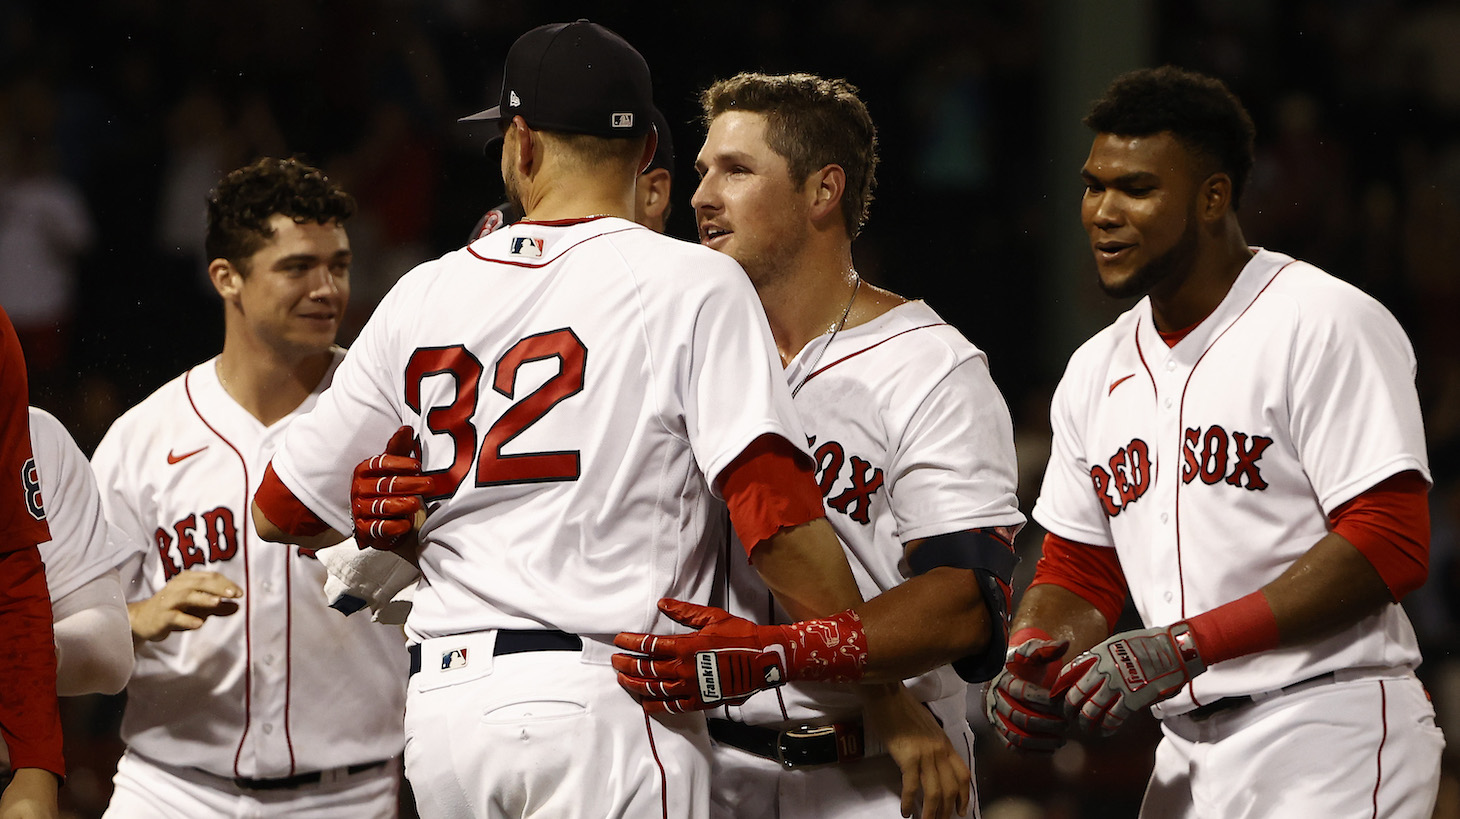 BOSTON, MA - JULY 22: Hunter Renfroe #10 of the Boston Red Sox is congratulated by Matt Barnes #32 after his game-winning sacrifice fly in the 10th inning against the New York Yankees at Fenway Park on July 22, 2021 in Boston, Massachusetts. (Photo By Winslow Townson/Getty Images)